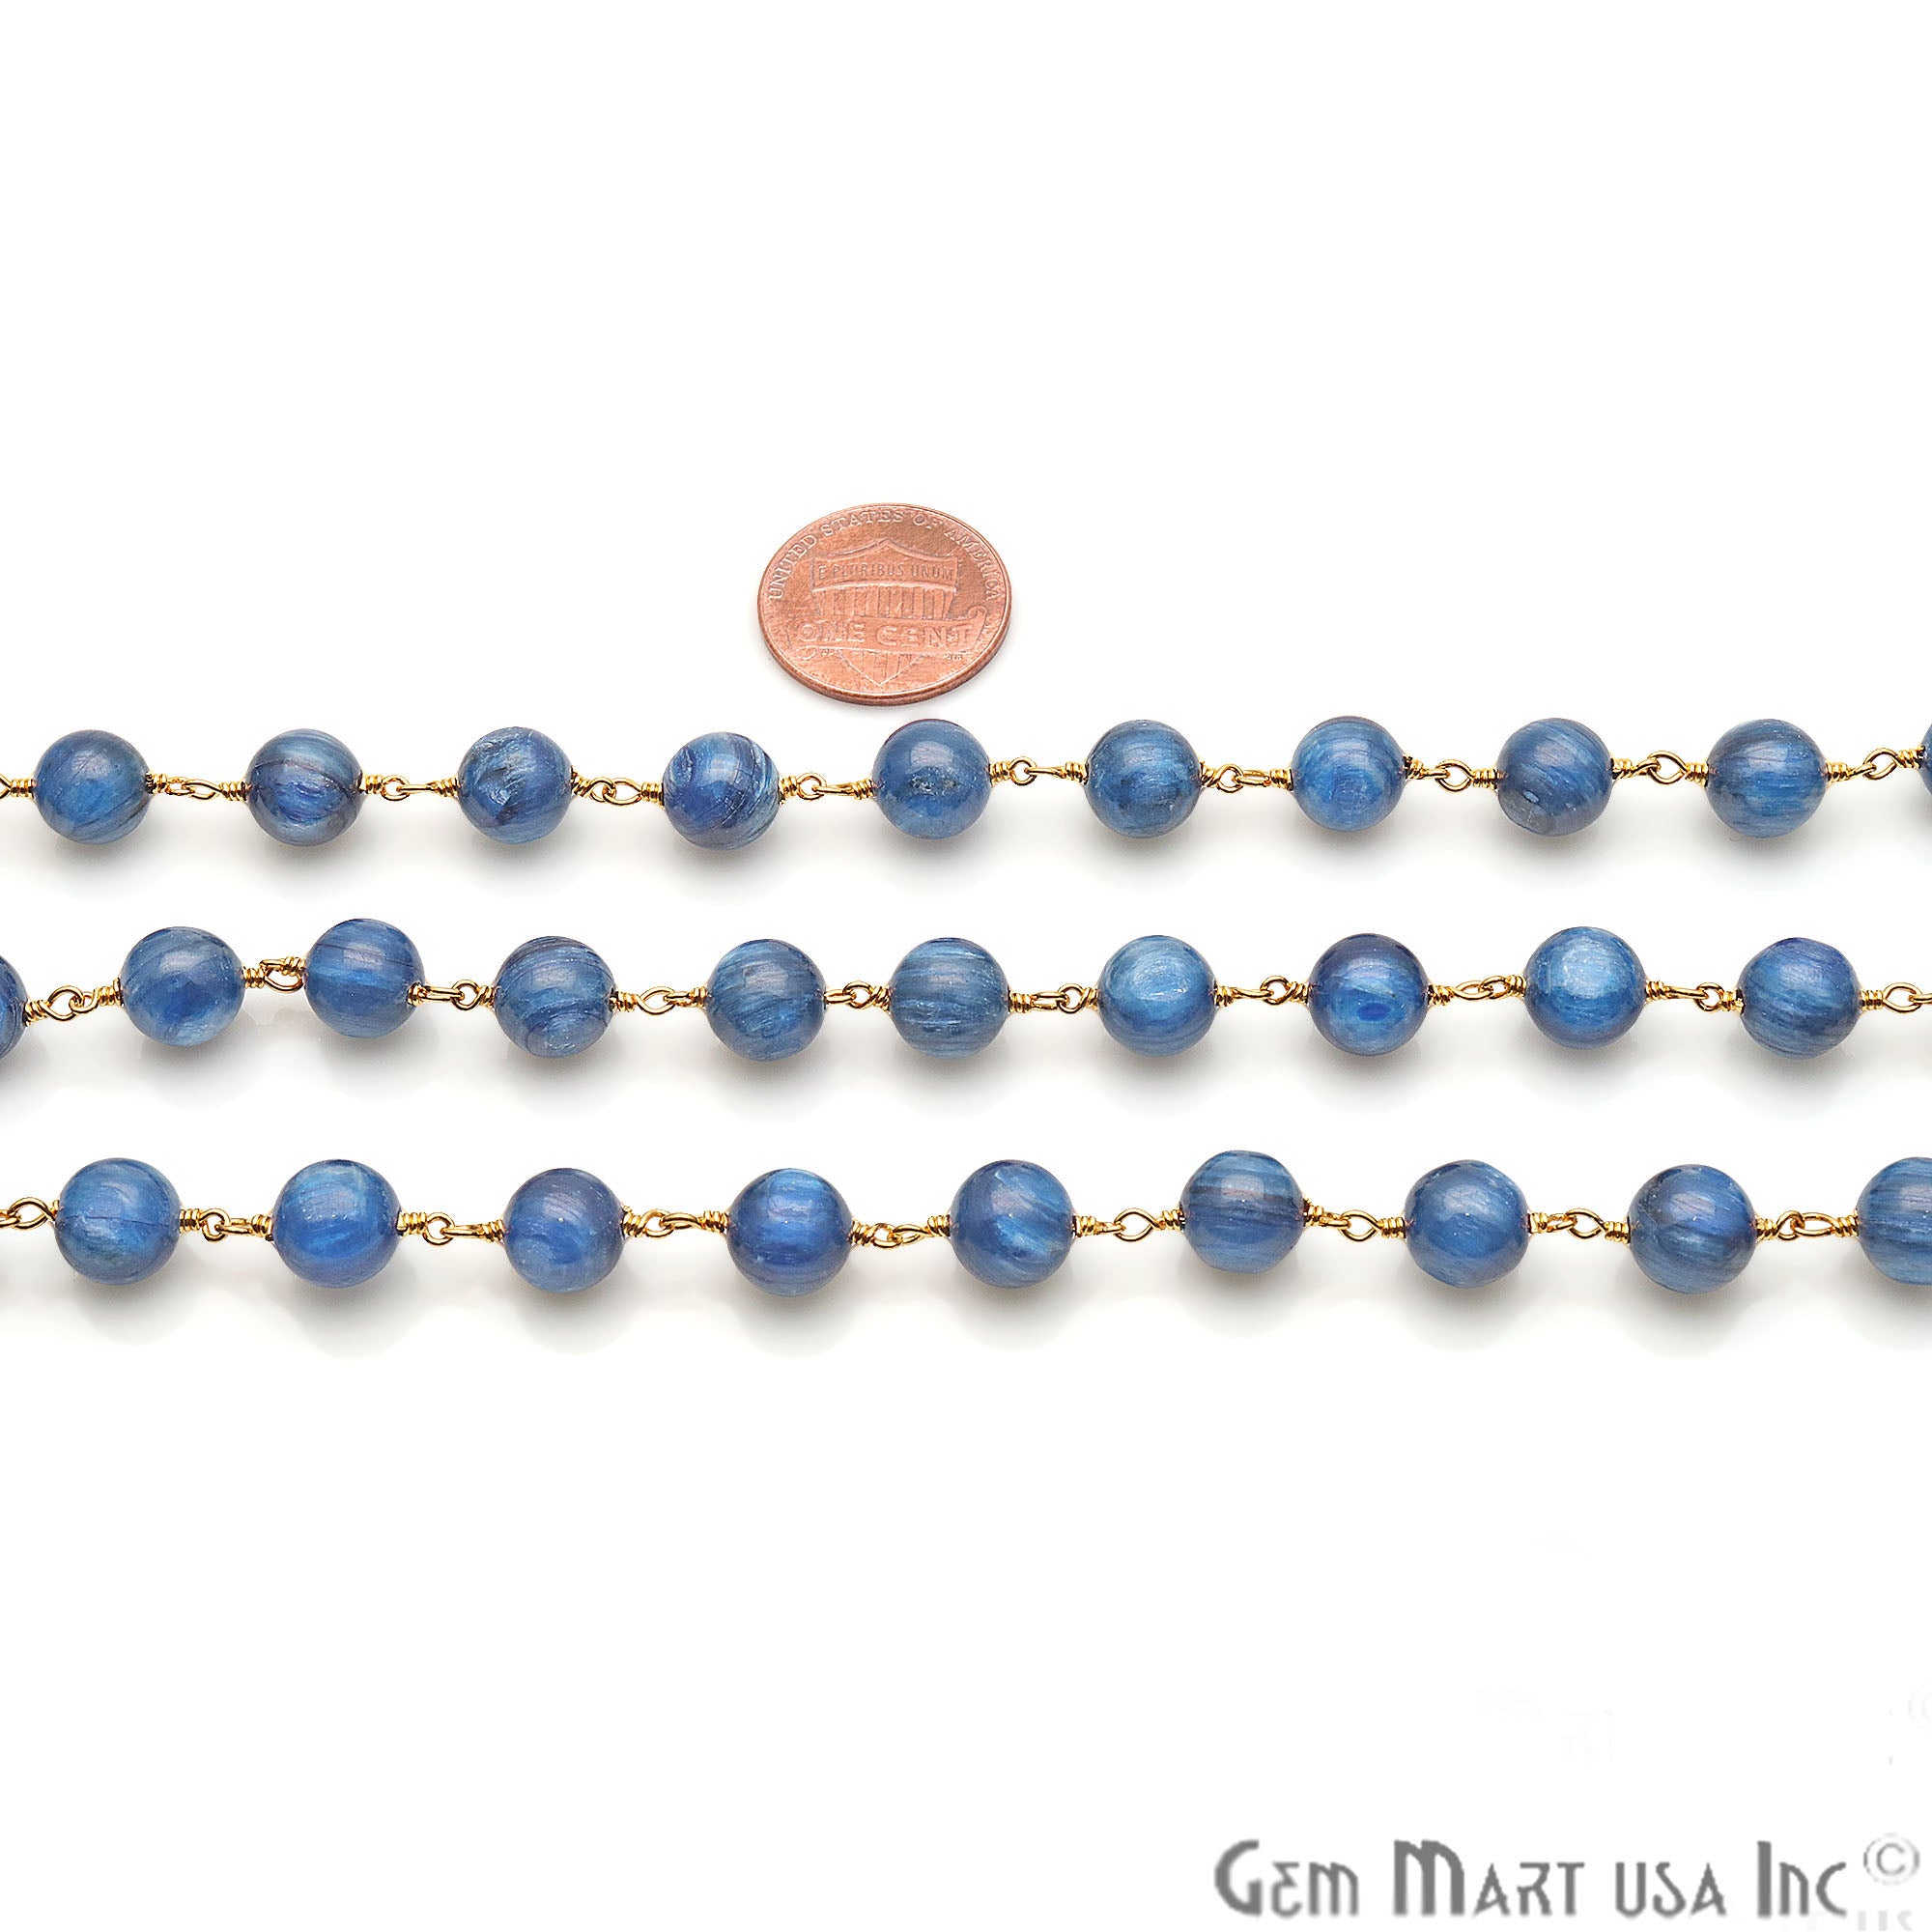 Kyanite Smooth Beads 8mm Gold Plated Wire Wrapped Rosary Chain - GemMartUSA